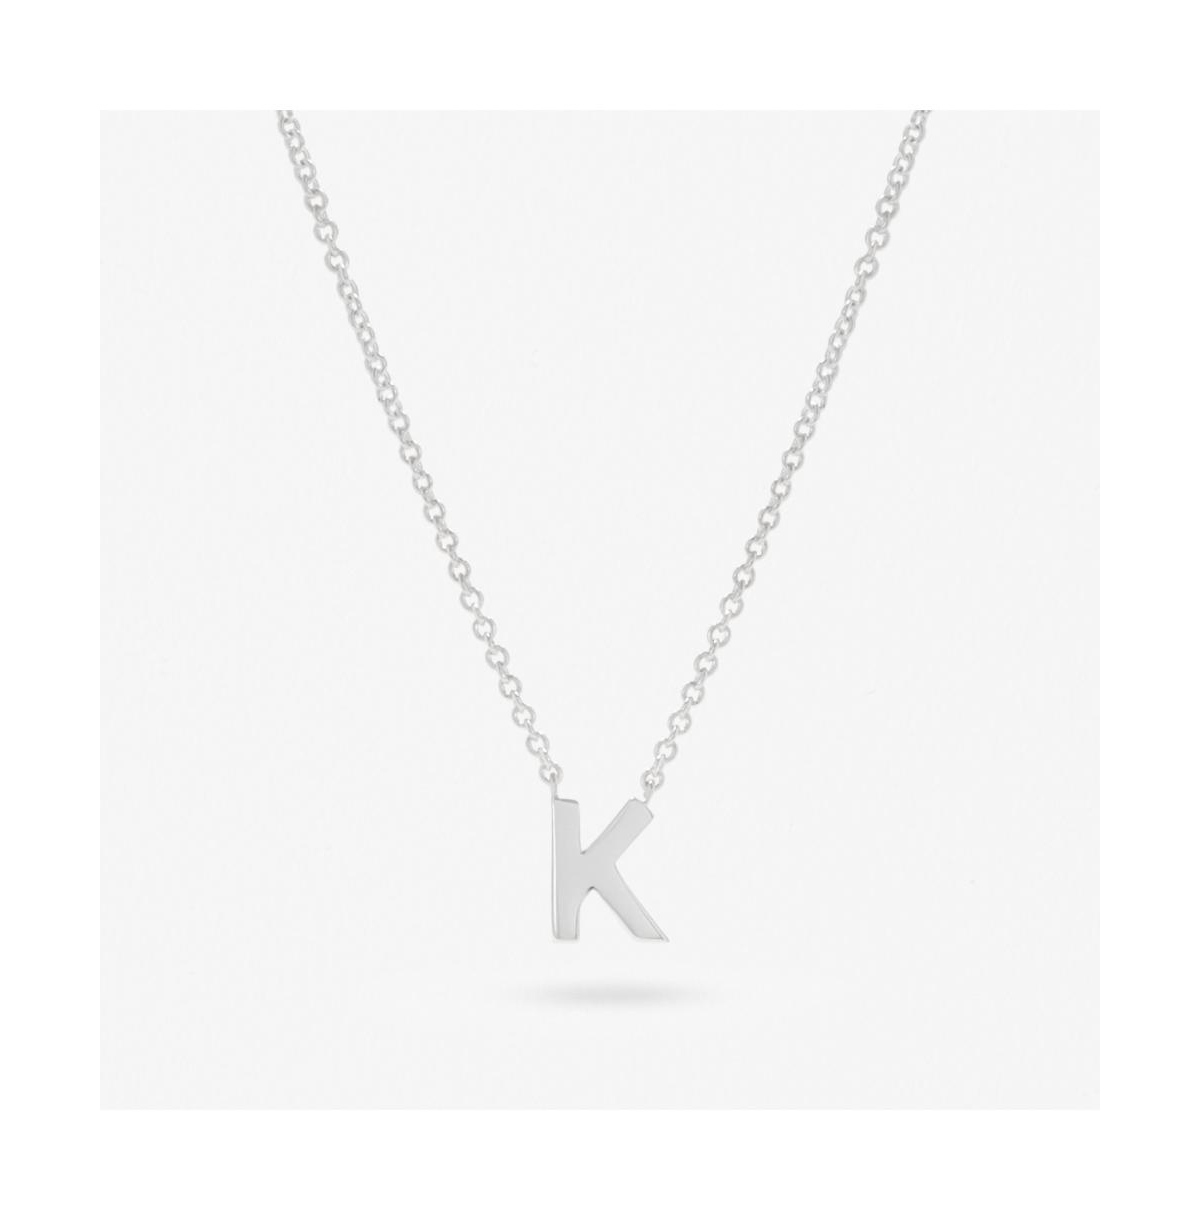 Silver Initial Necklace - Letter Necklace - Silver initial - letter k